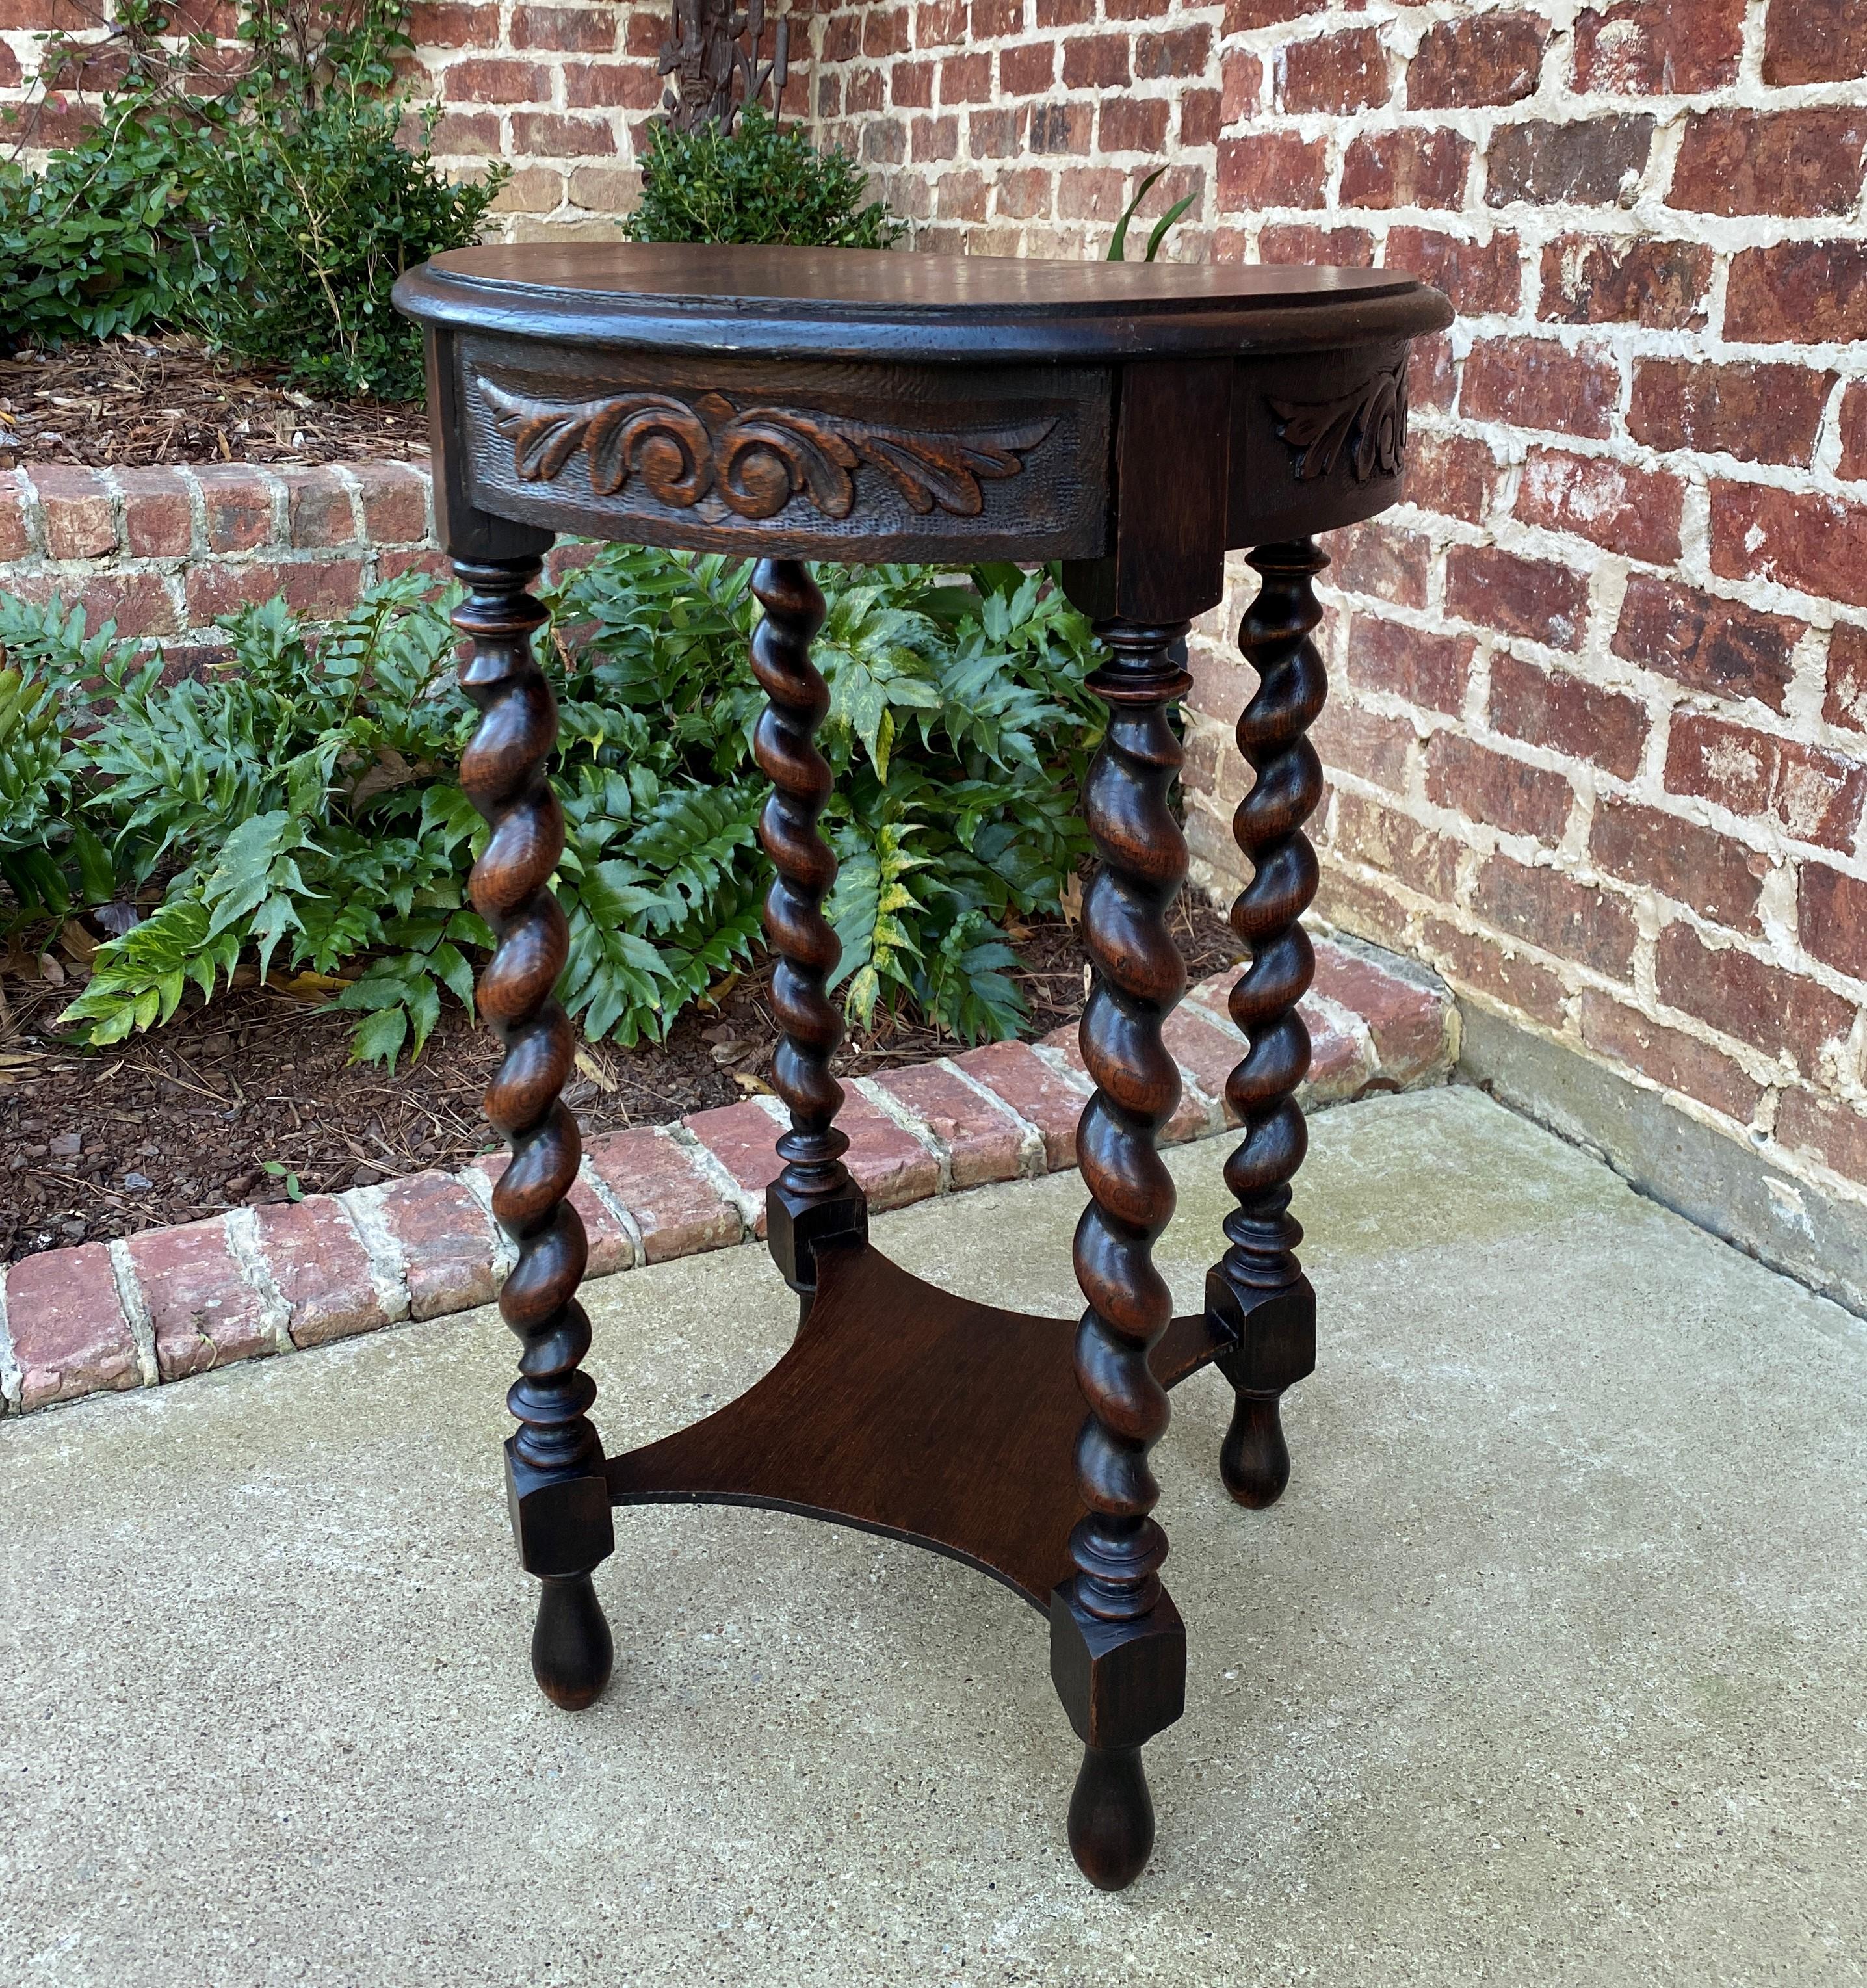 Carved Antique English Round Table End Table Occasional Table Barley Twist Oak 2-Tier